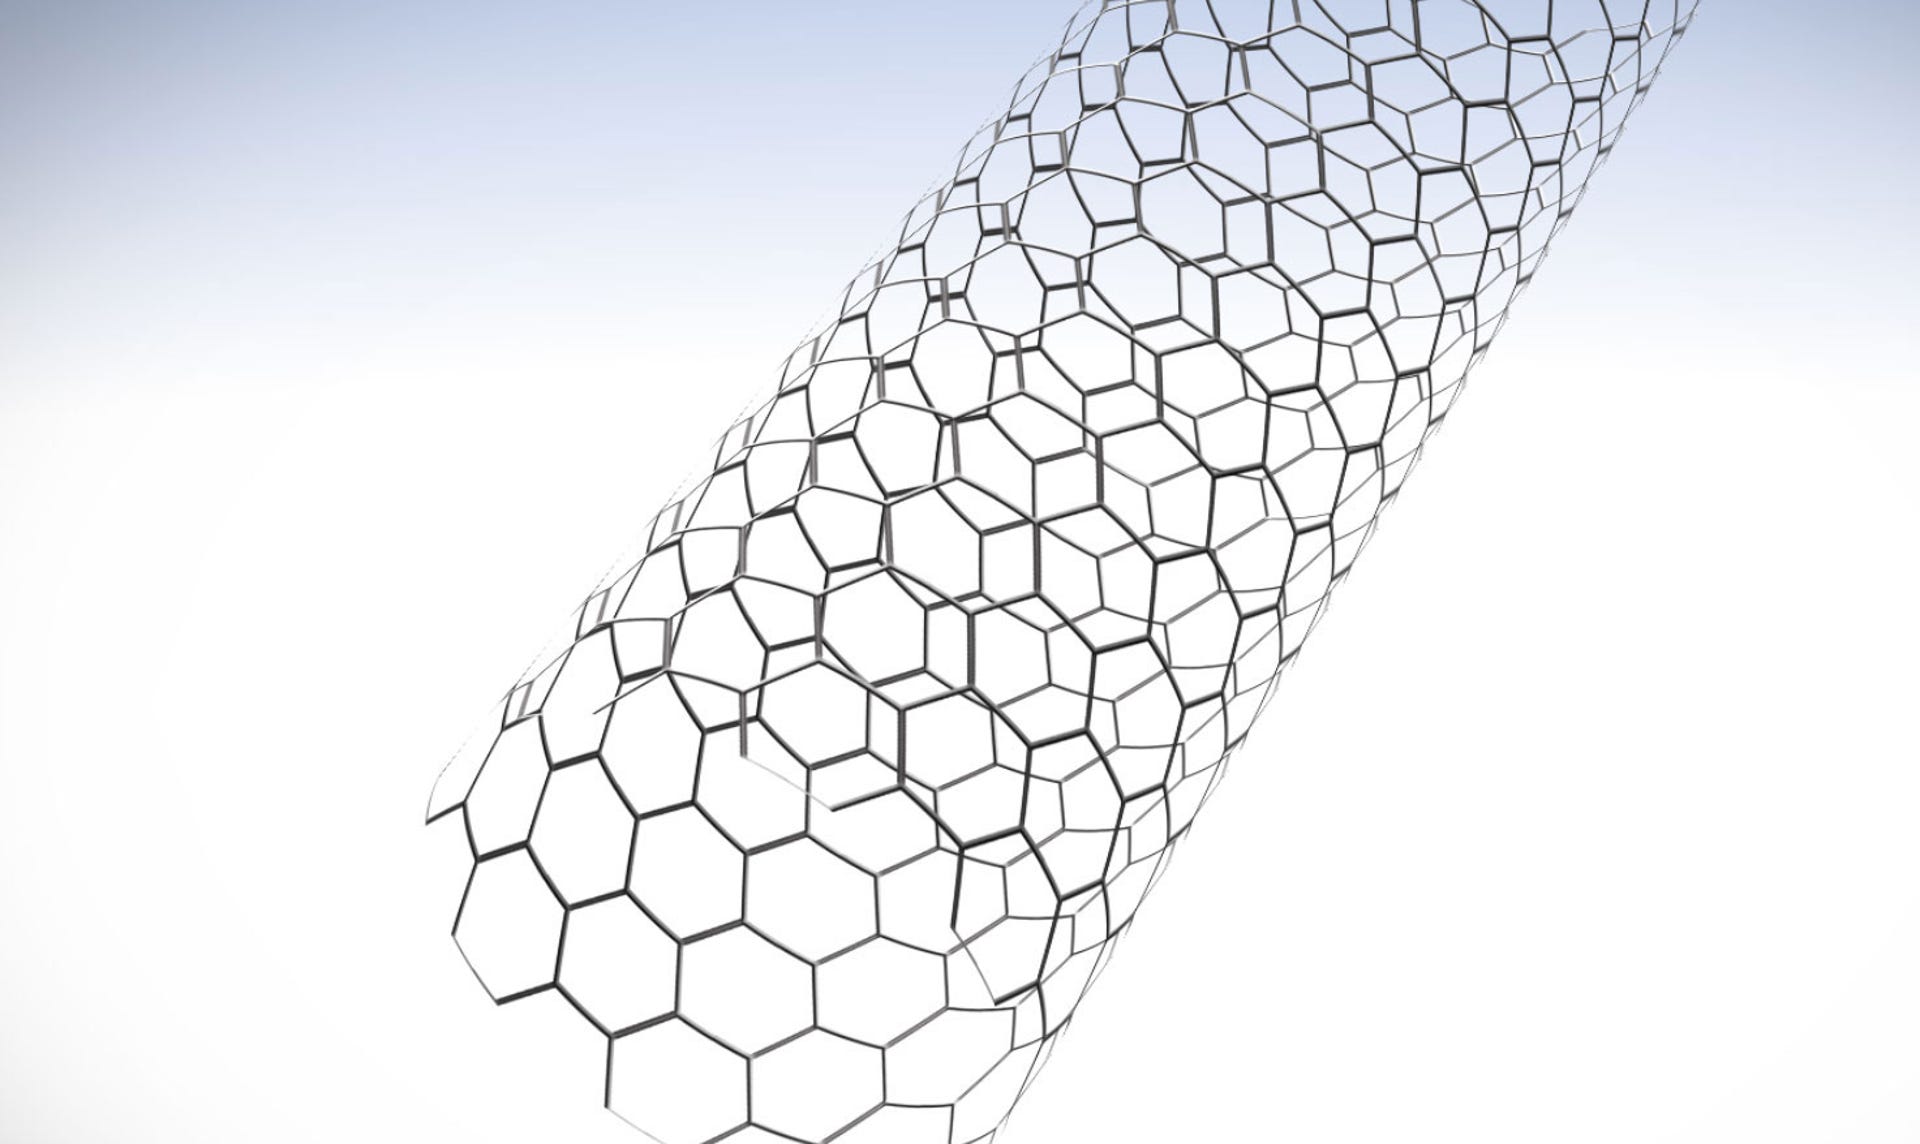 A carbon nanotube (CNT) is a lattice of carbon atoms rolled into a cylindrical shape. Each one is about 10 billionths of a meter wide -- about 10,000 times thinner than a human hair.